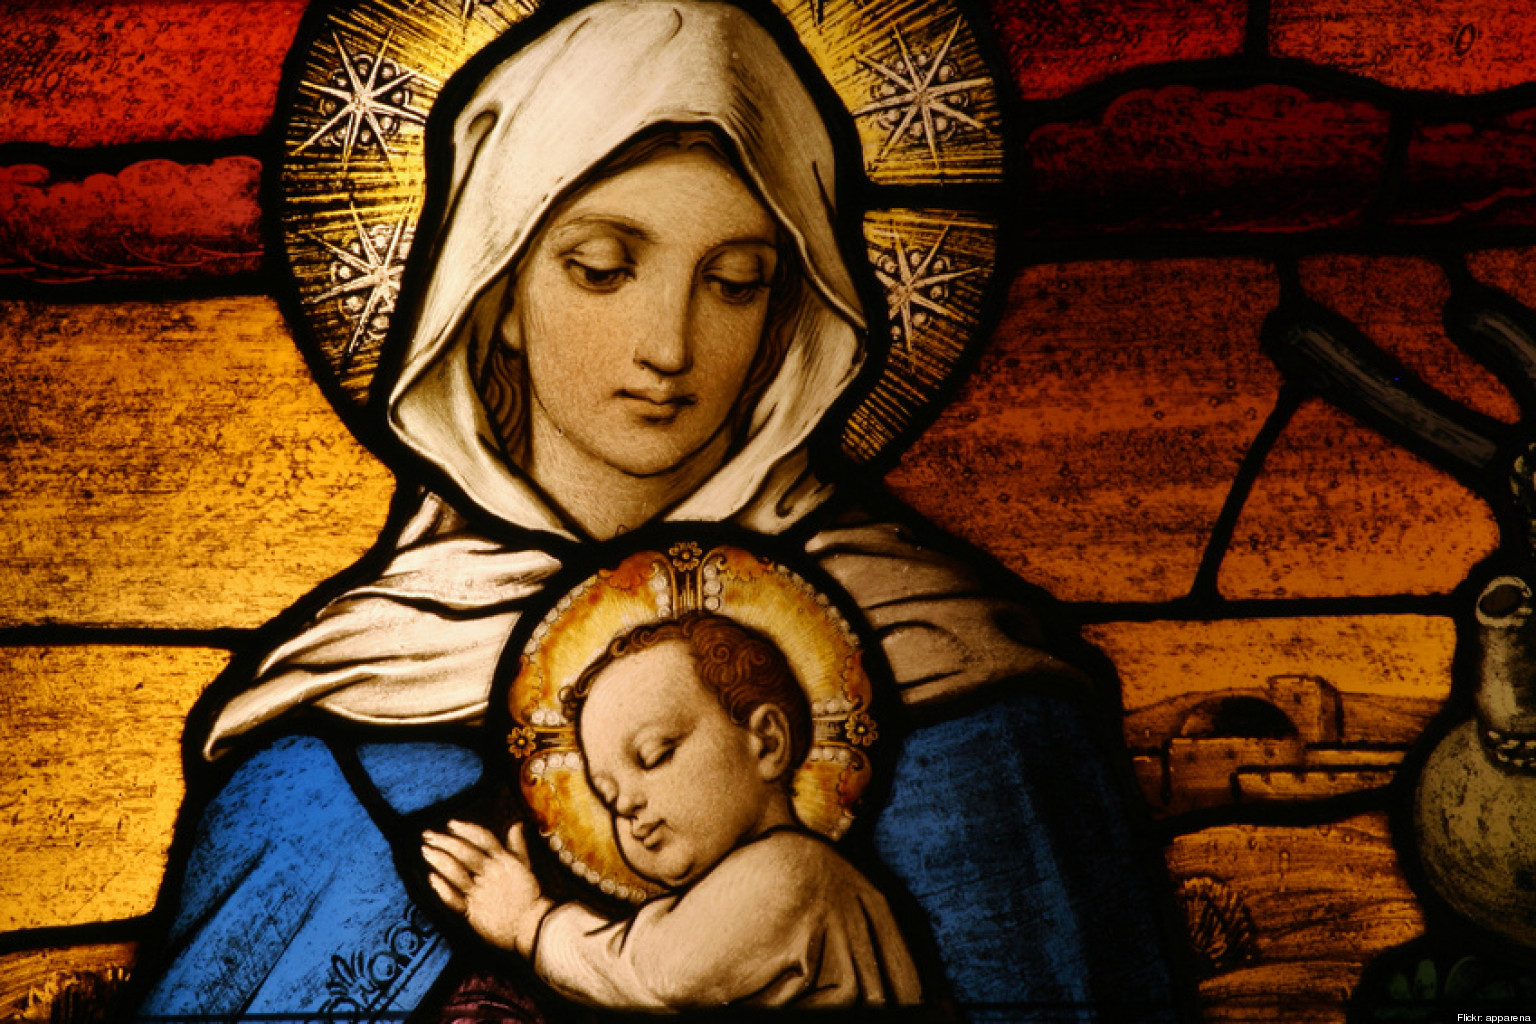 The Virgin Mary and the Christ Child. Image via Adobe Stock